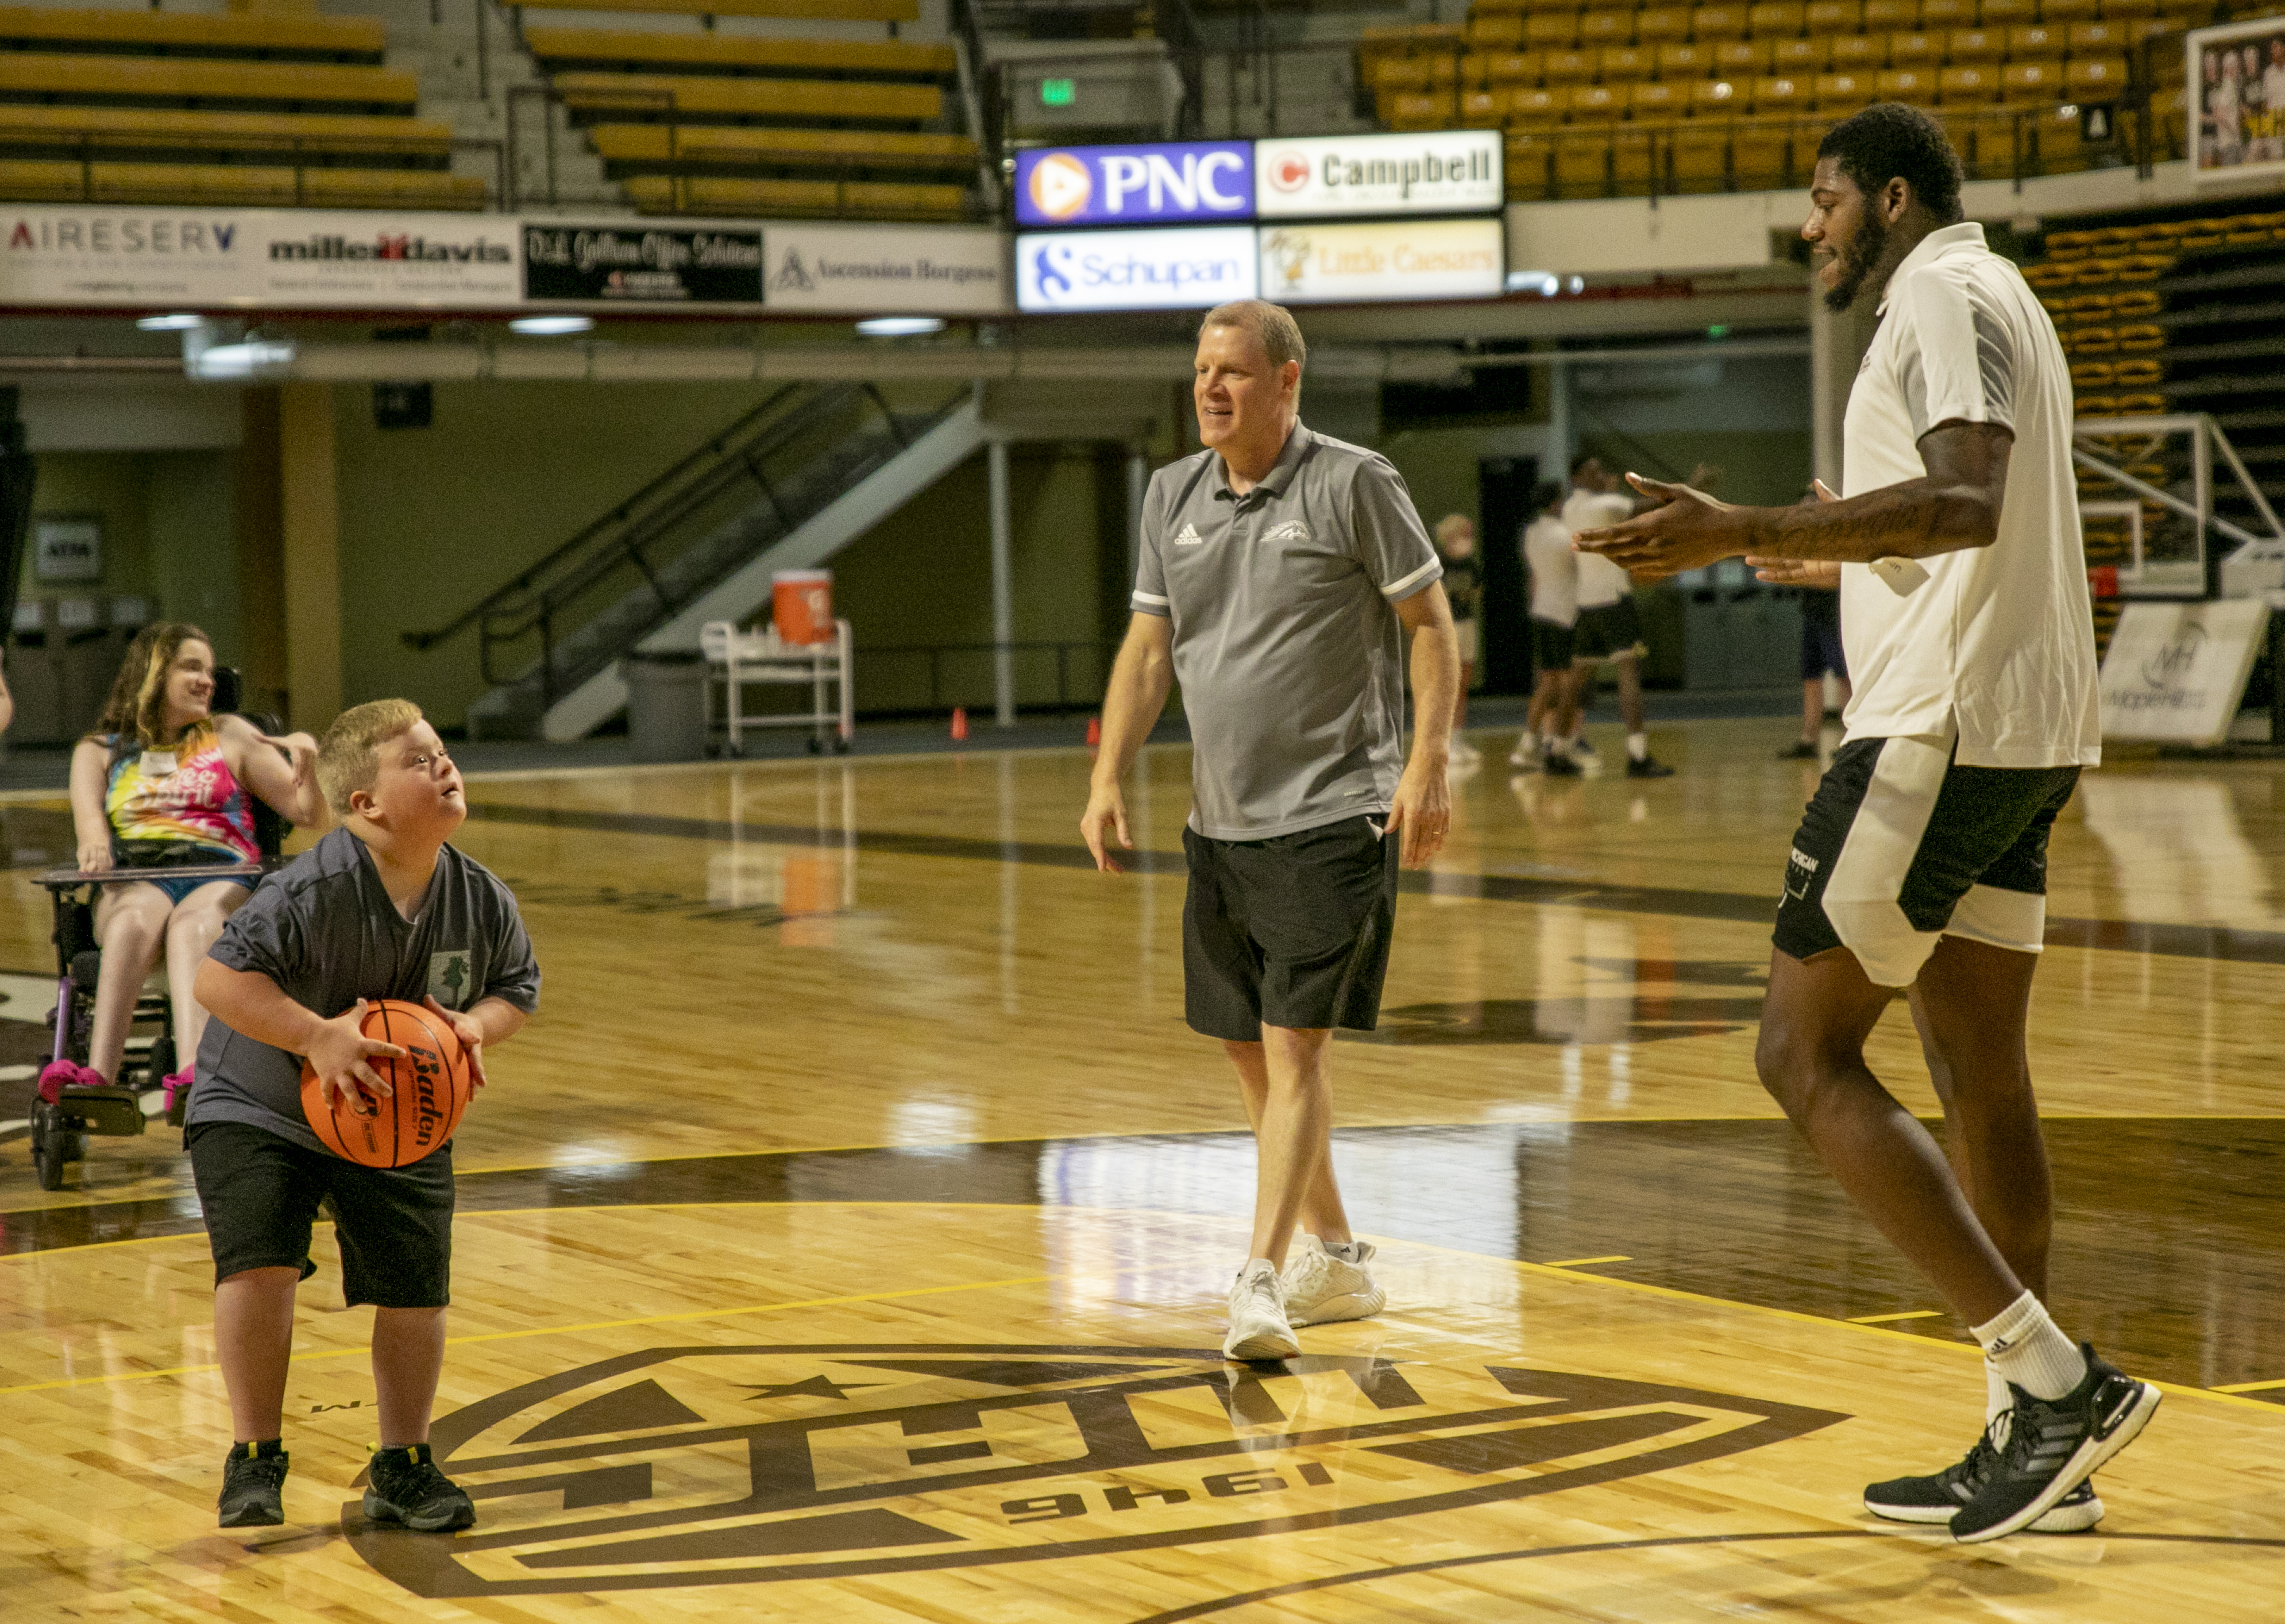 The Beautiful Lives Project collaborates with Western Michigan University’s basketball team to give disabled kids and adults a chance to play basketball with members of WMU's men's basketball team and coaching staff at WMU’s University Arena in Kalamazoo, Michigan on Wednesday, June 15, 2022. (Gabi Broekema | MLive.com)